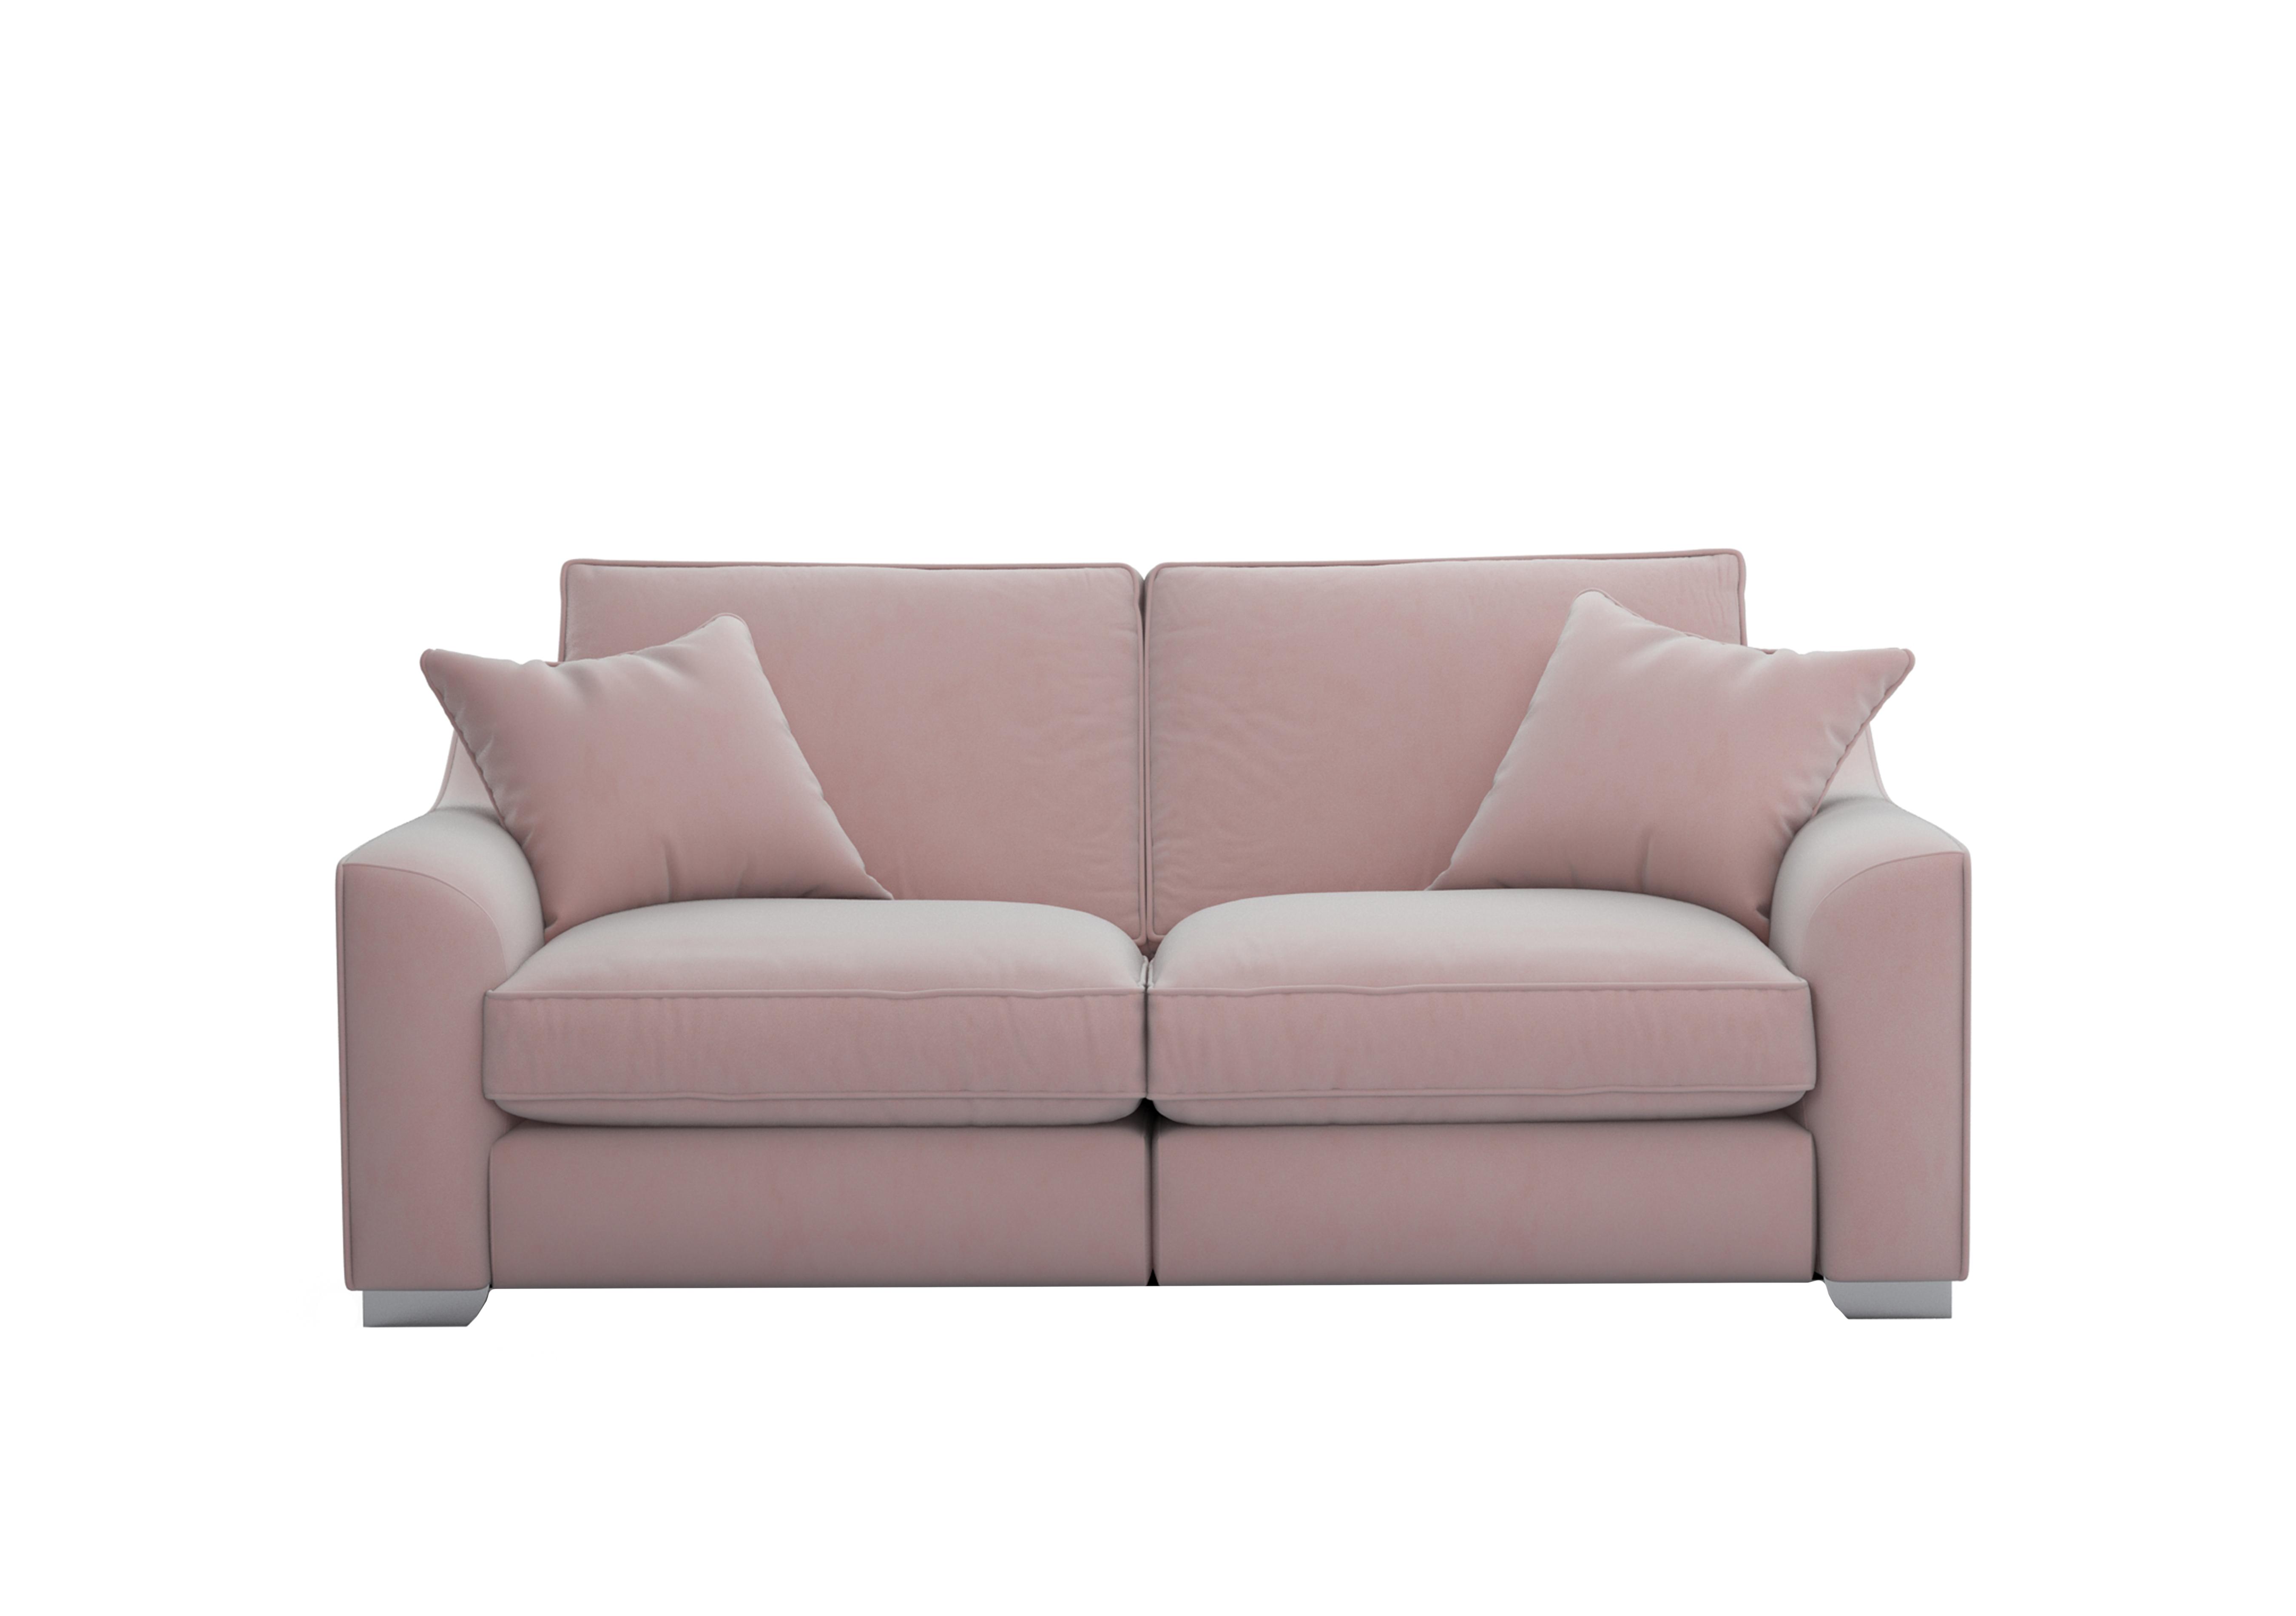 Isobel 3 Seater Fabric Sofa in Cot256 Cotton Candy Ch Ft on Furniture Village